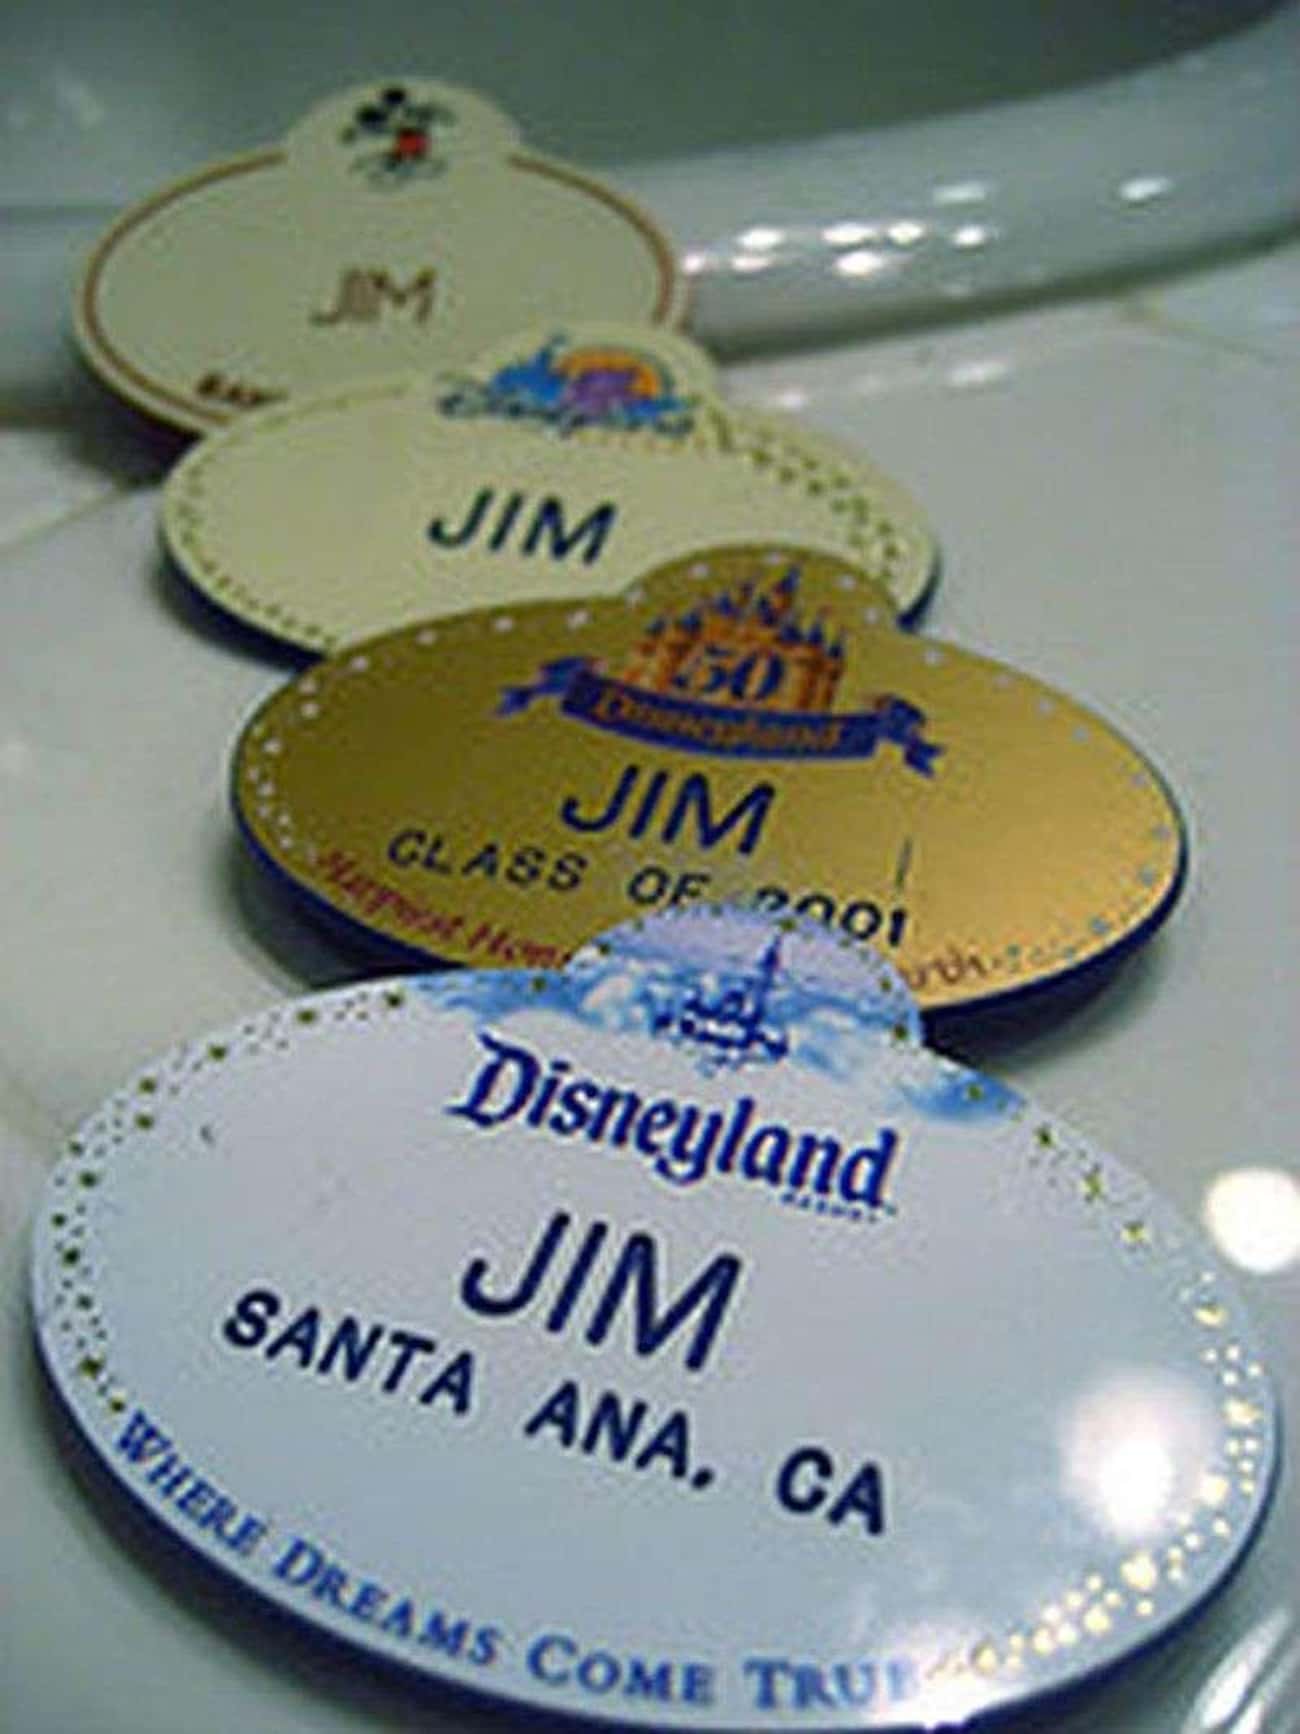 Disney Employee Name Tags Display First Names Only Due to Walt&#39;s Disdain of Being Called &#39;Mr. Disney&#39;